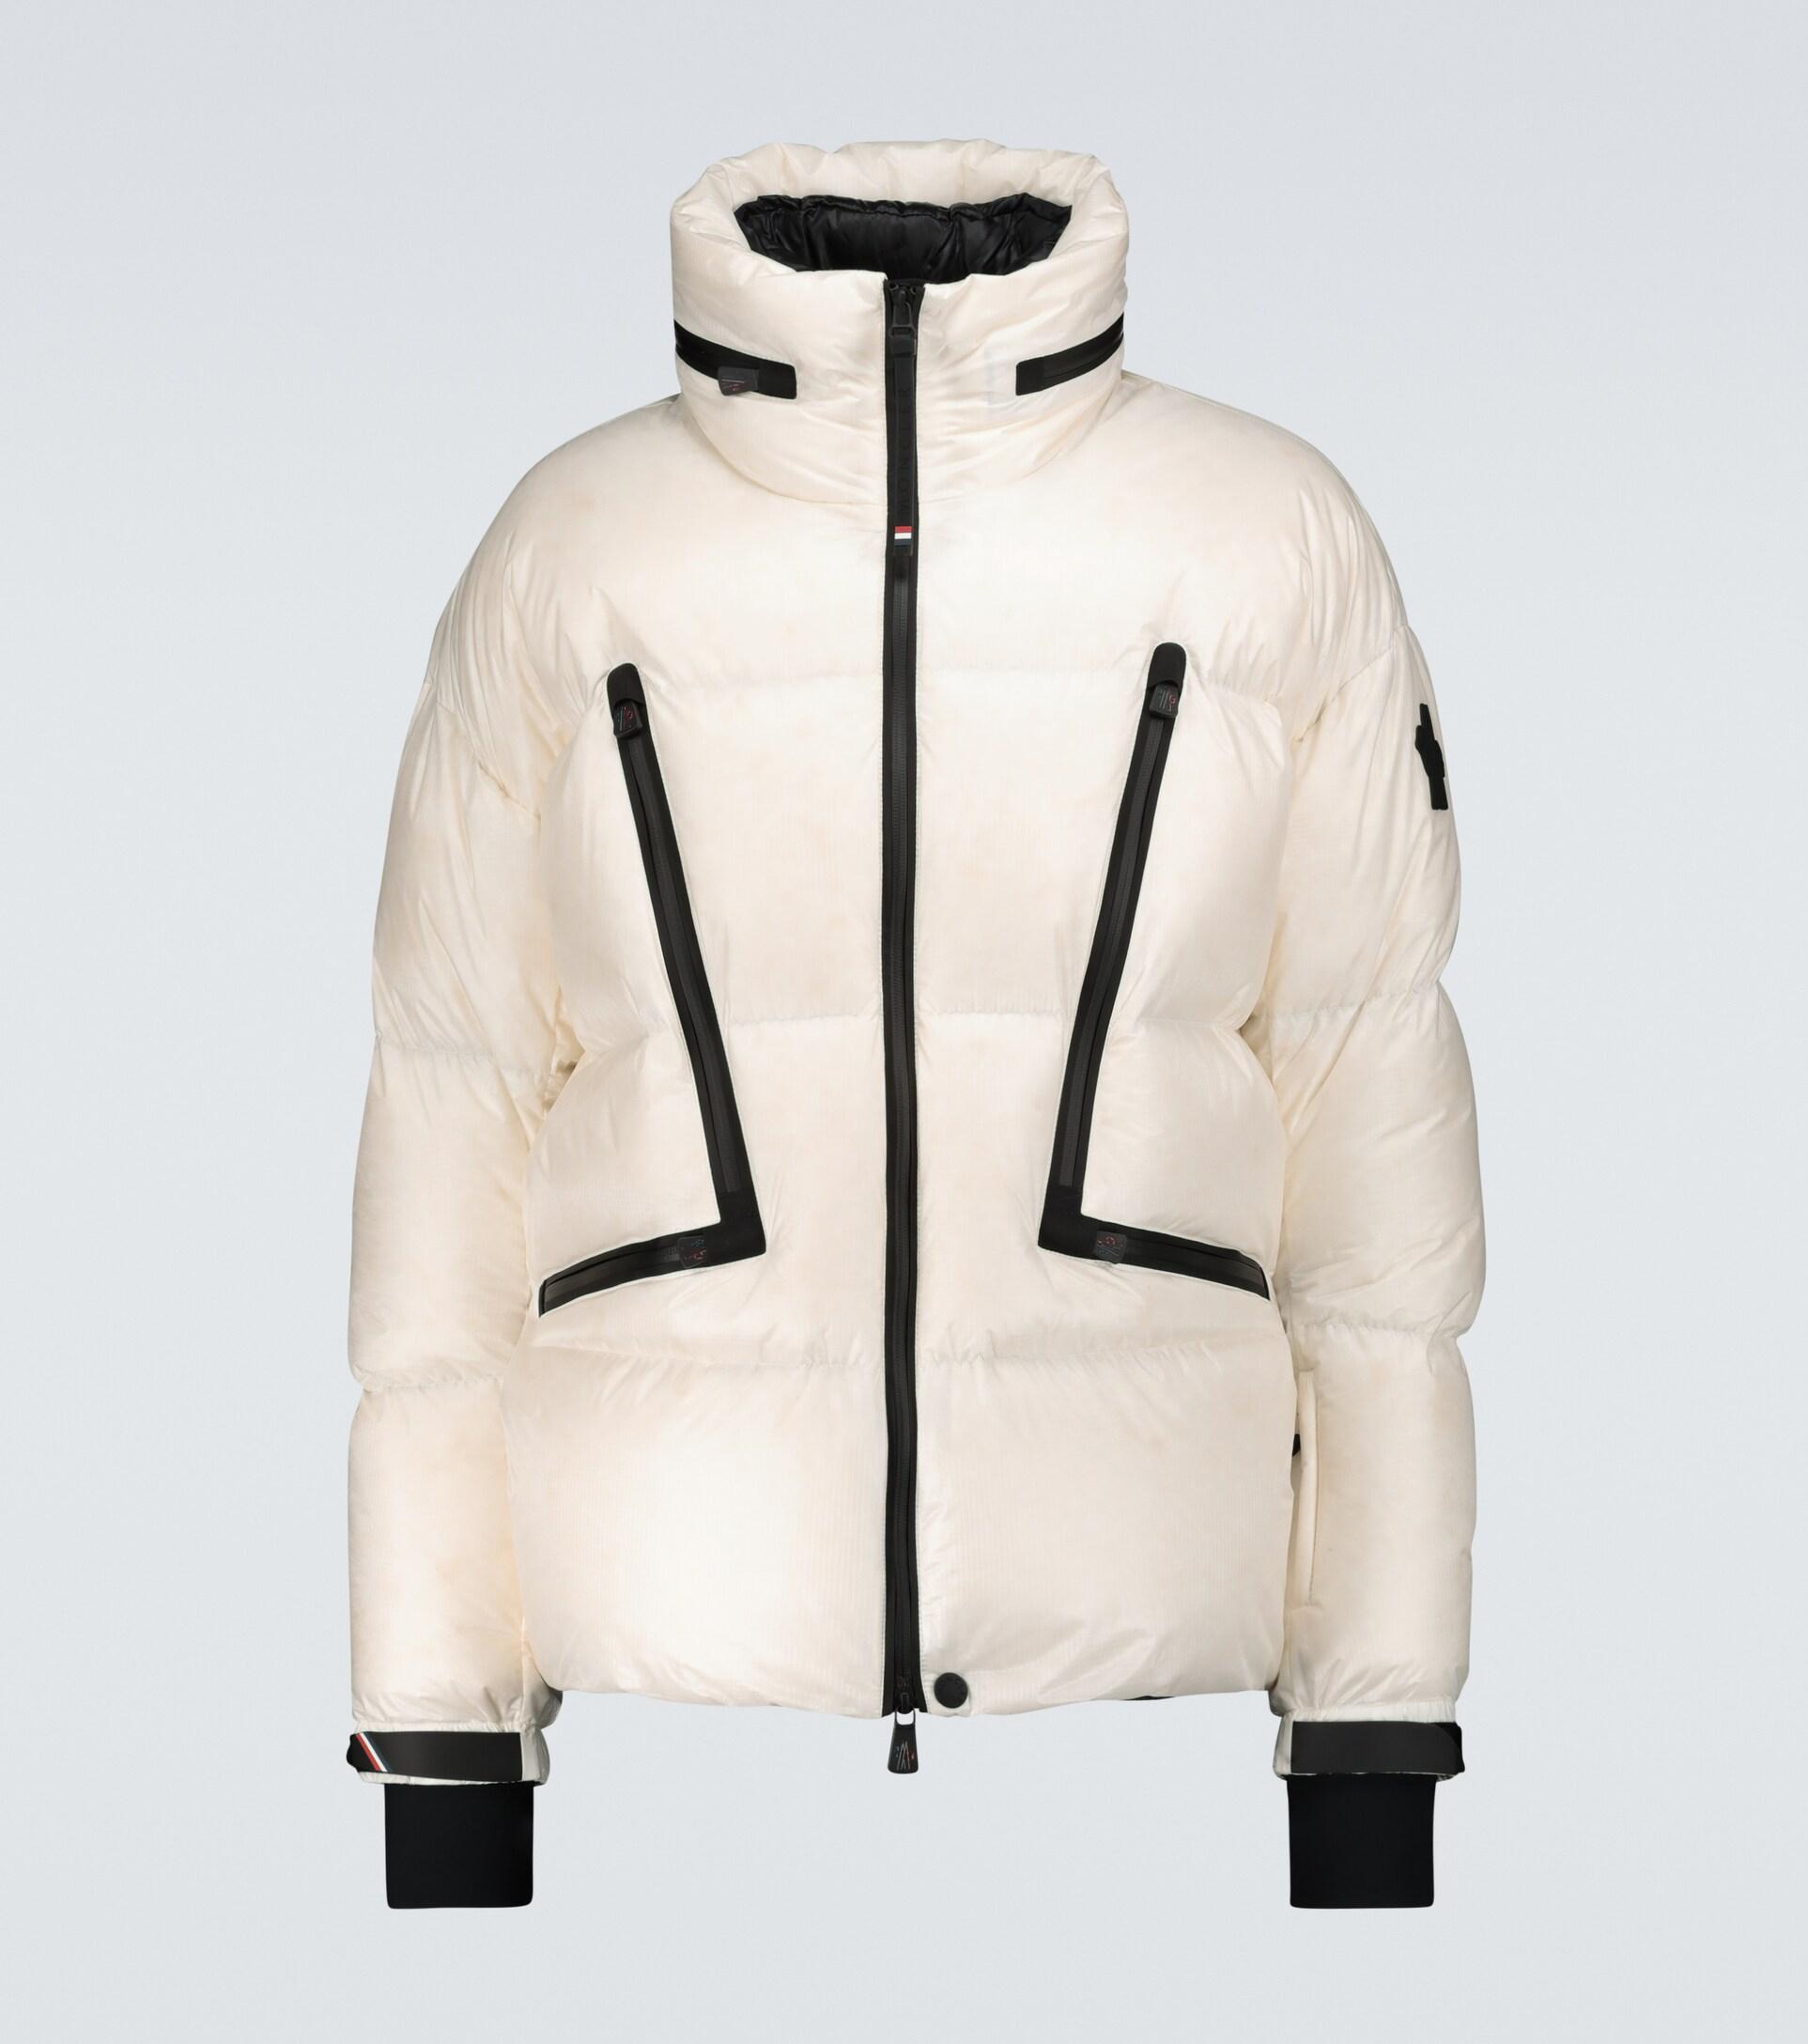 Moncler Genius 3 Moncler Grenoble Croz Photo-luminescent Jacket in ...